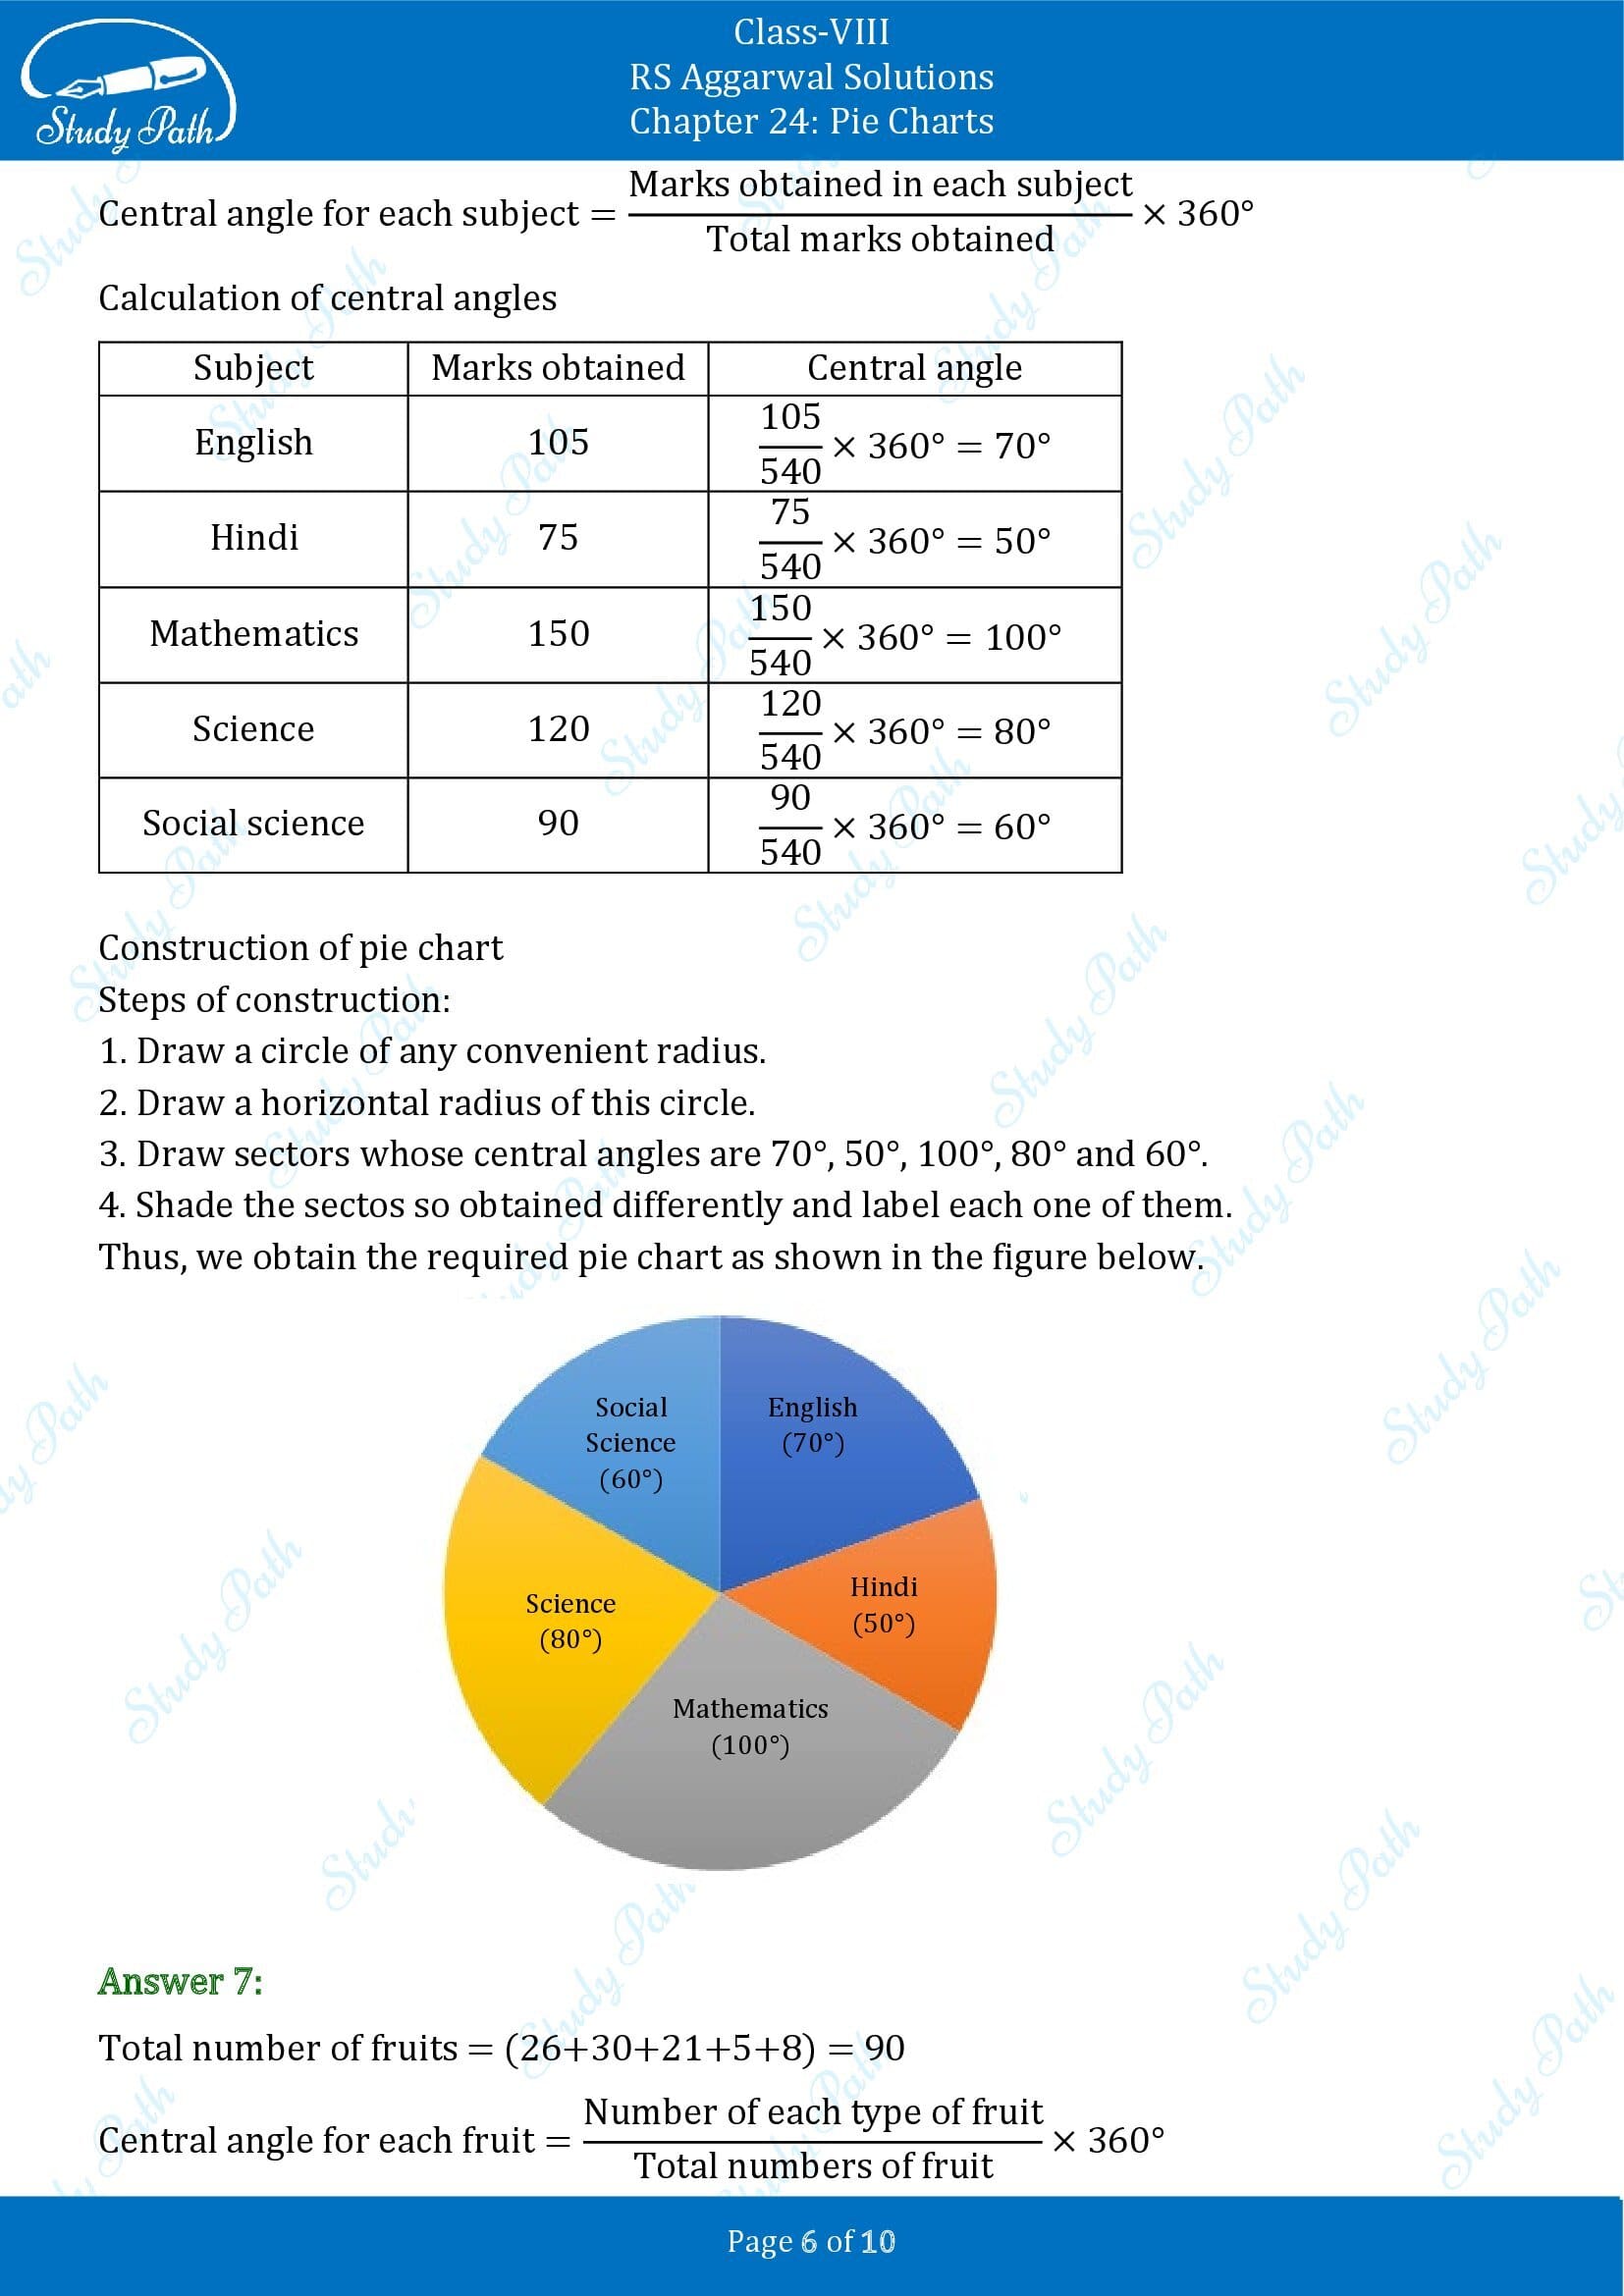 RS Aggarwal Solutions Class 8 Chapter 24 Pie Charts Exercise 24A 00006